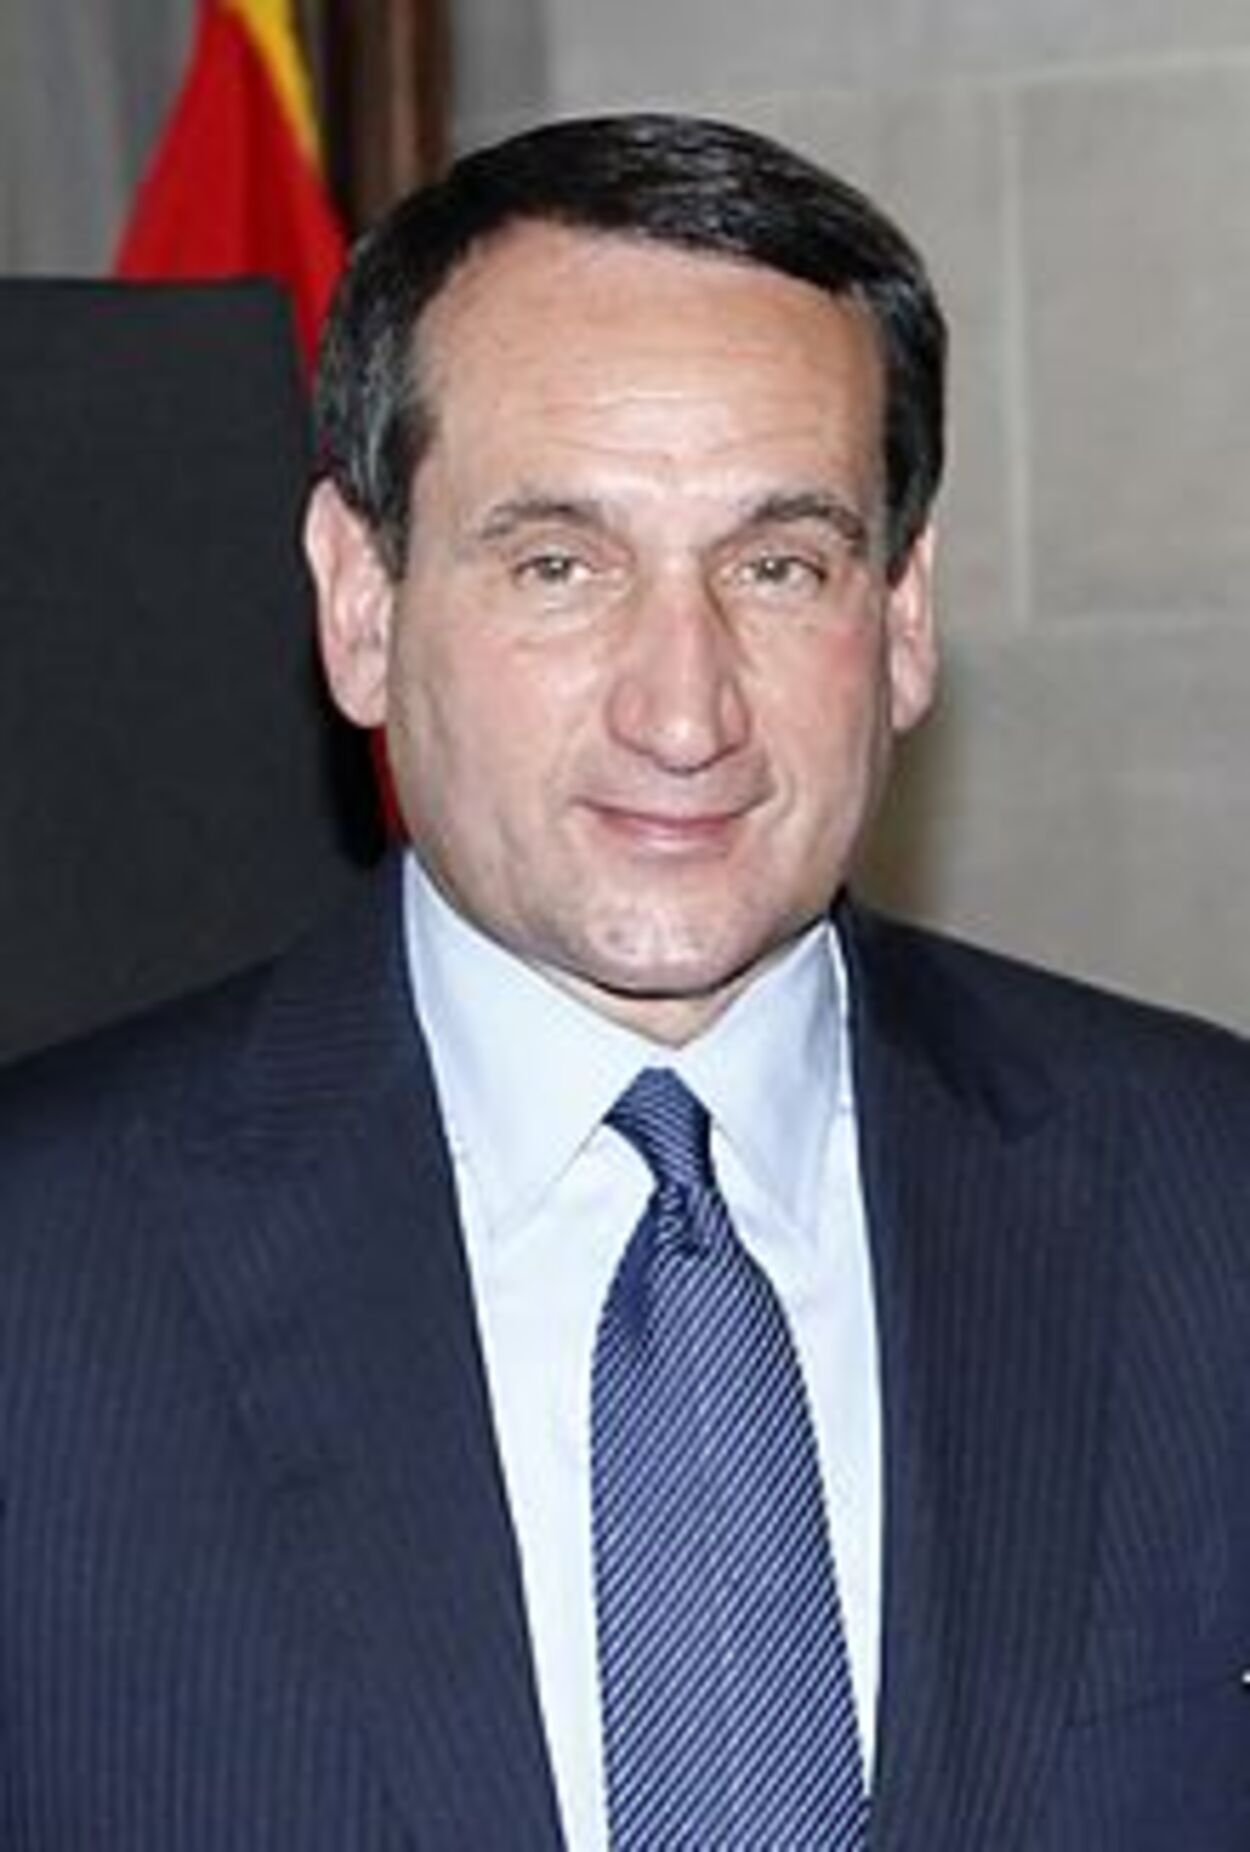 Where Does Mike Krzyzewski Live? (Find Out!)